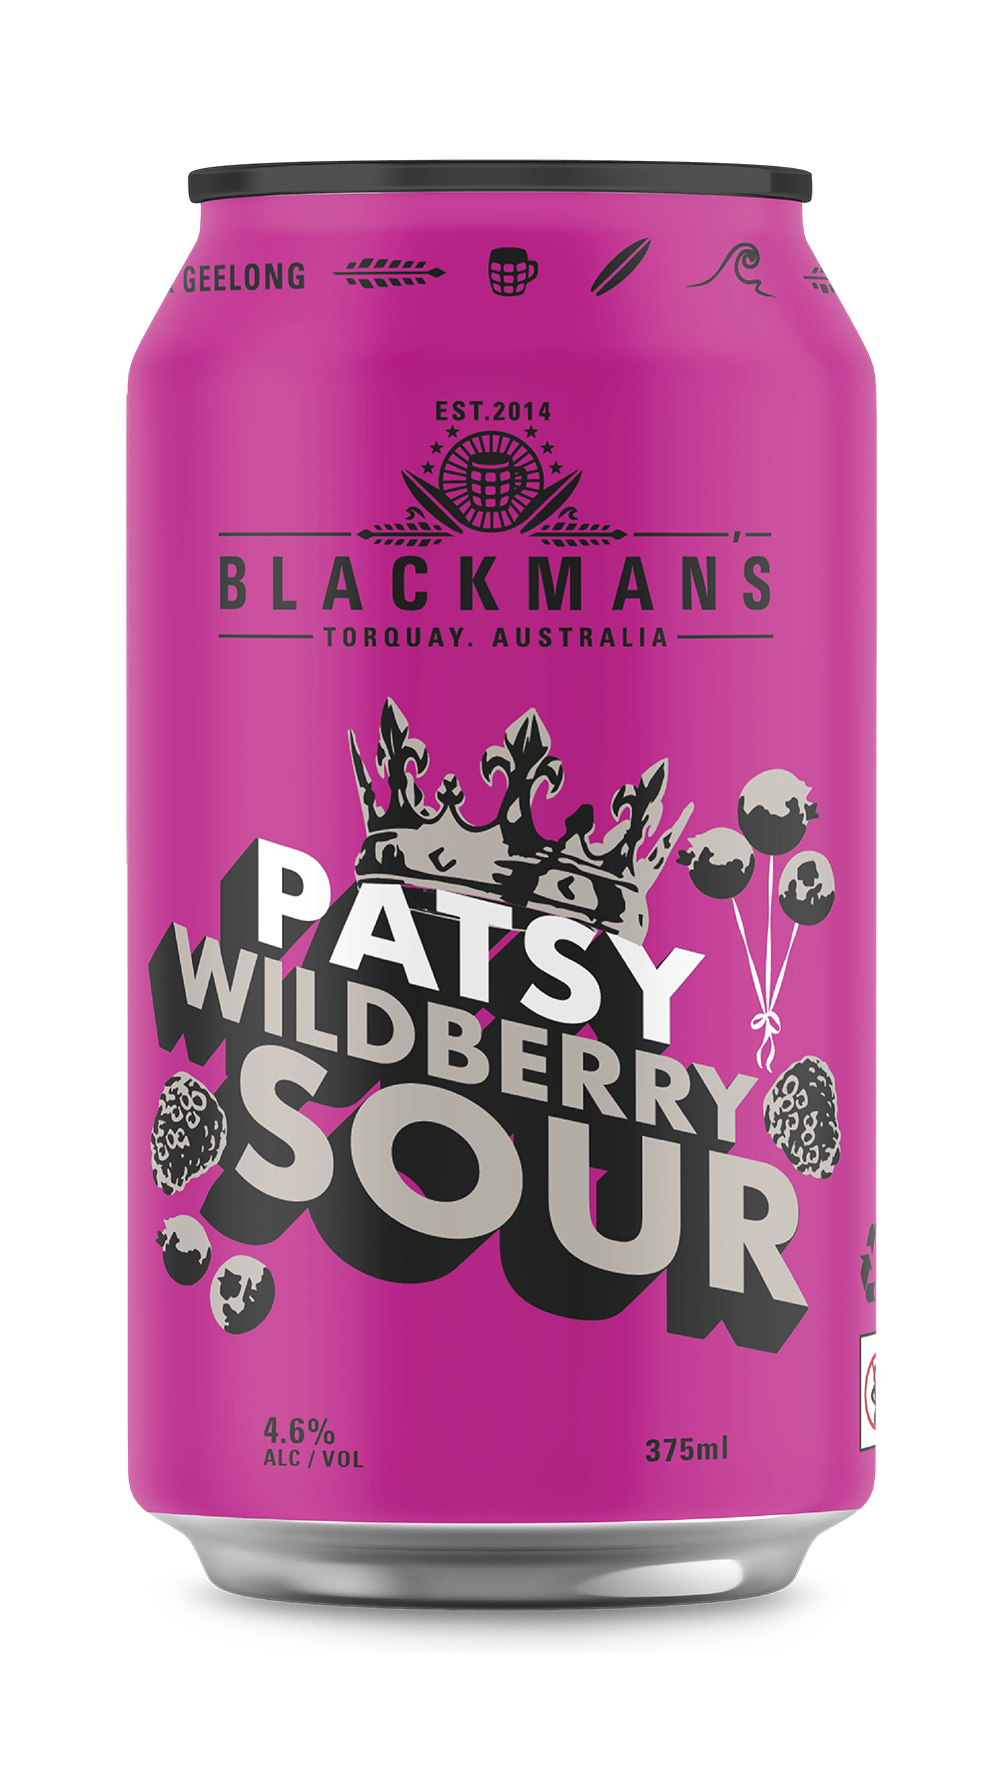 PATSY WILD BERRY SOUR